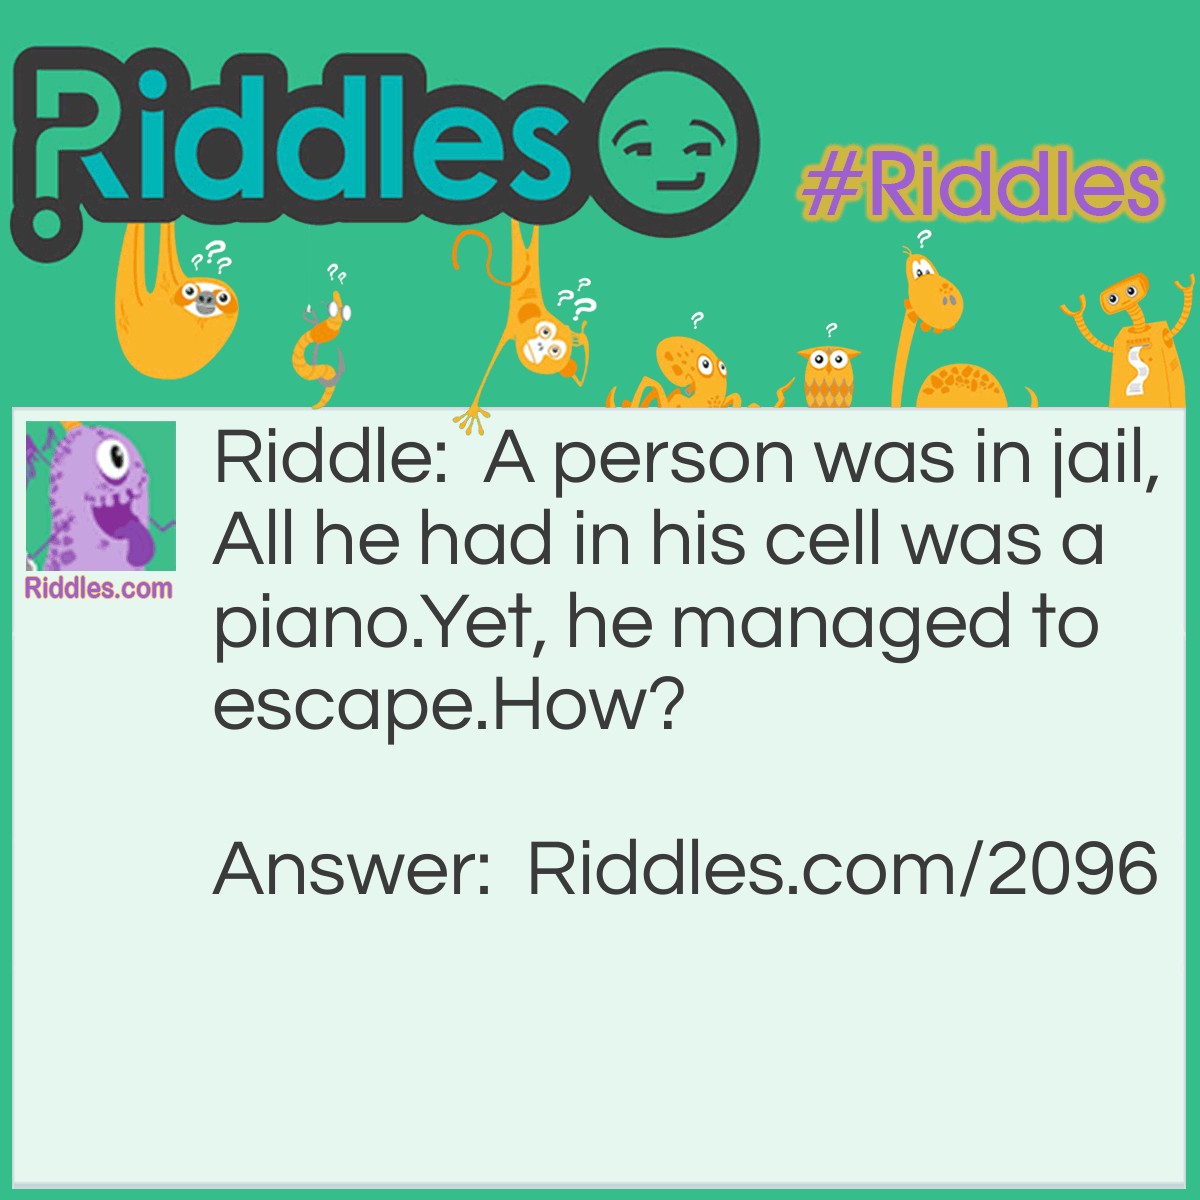 Riddle: A person was in jail,
All he had in his cell was a piano.
Yet, he managed to escape.
How? Answer: He played the piano until he found the right key.